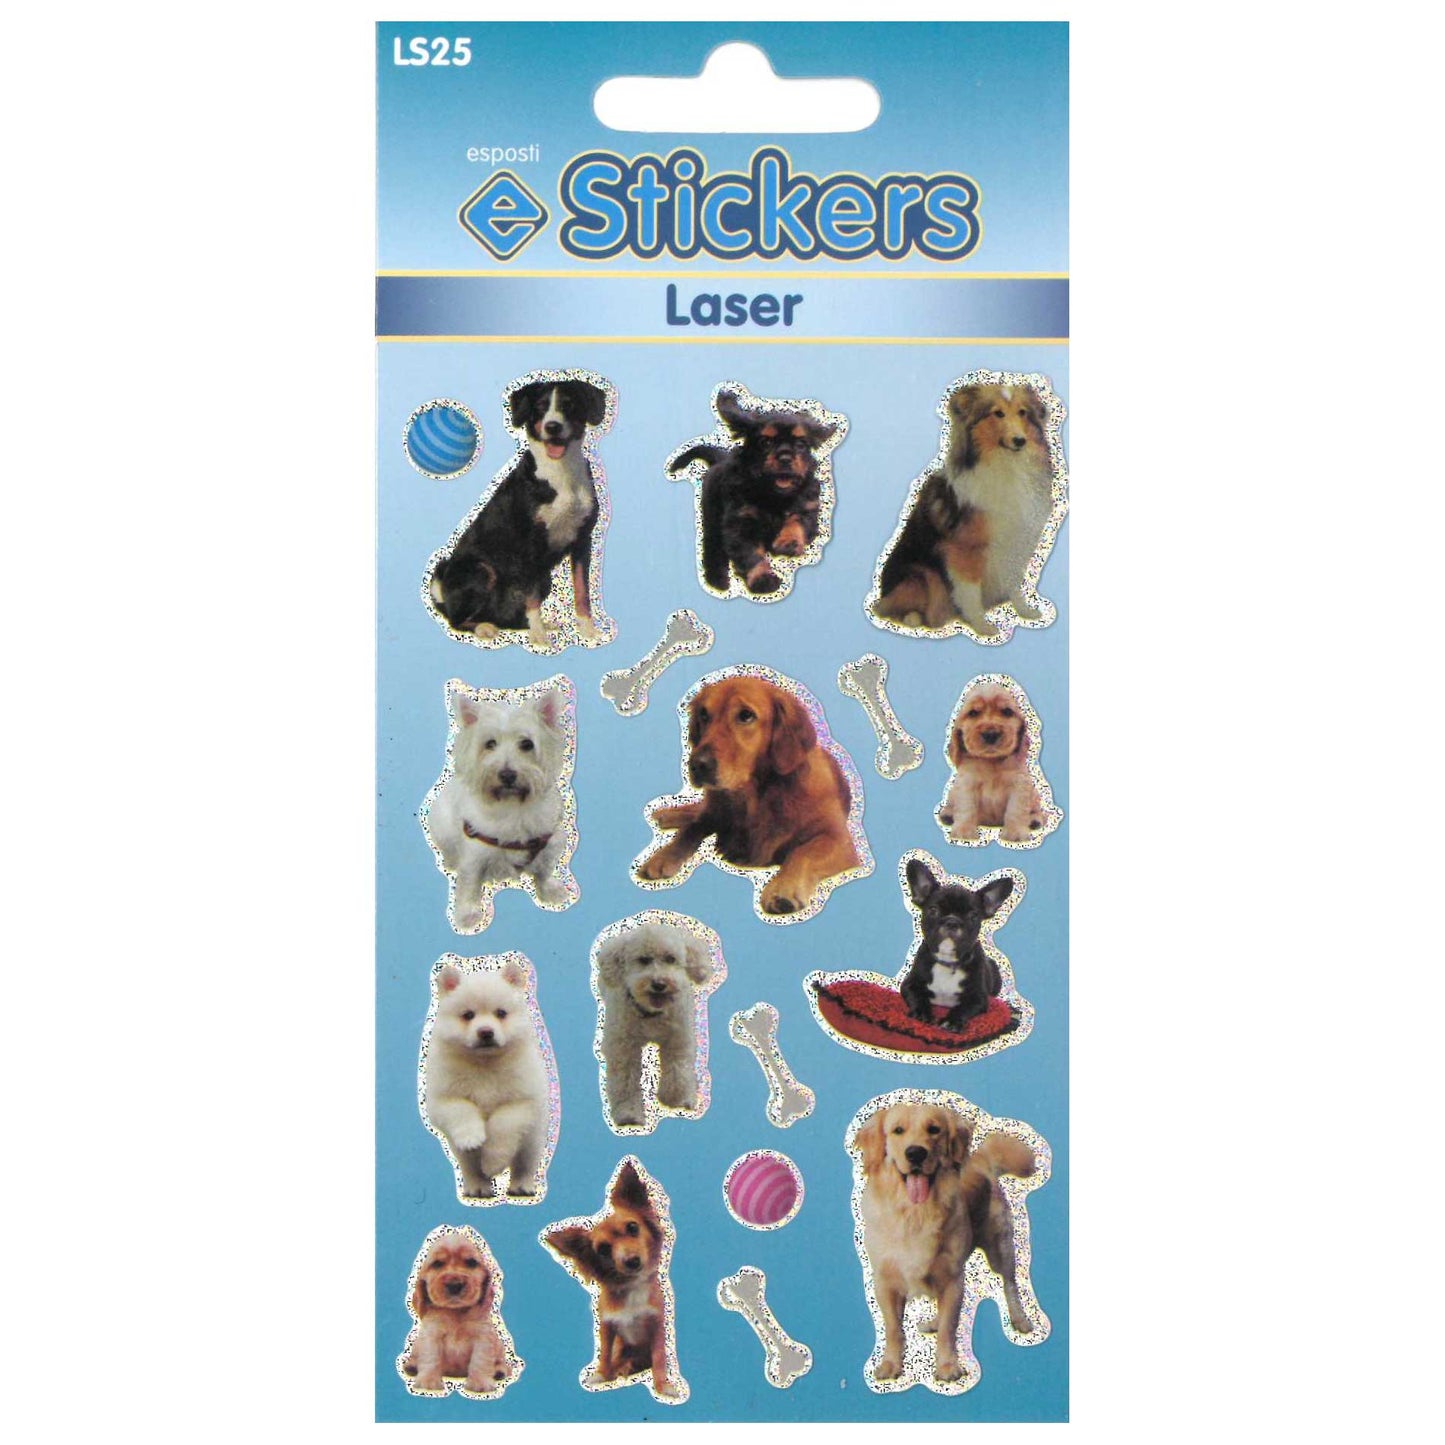 Laser Dogs & Puppies Stickers - LS25